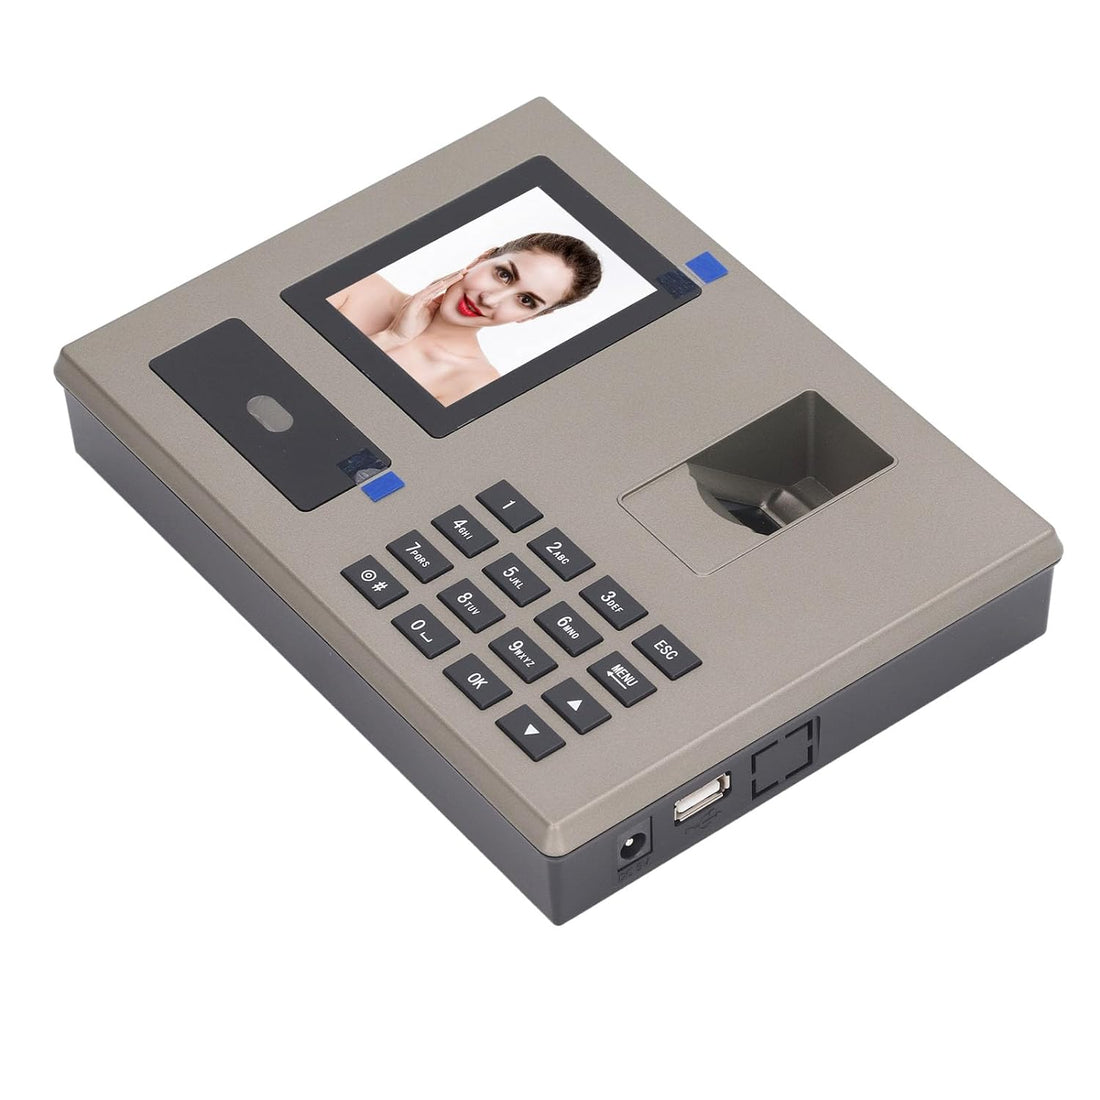 Employee Attendance Machine Simple Operation Warm Voice Prompt Quick Identification 100-240V Face Time Biometric Attendance Machine for Office (US Plug)